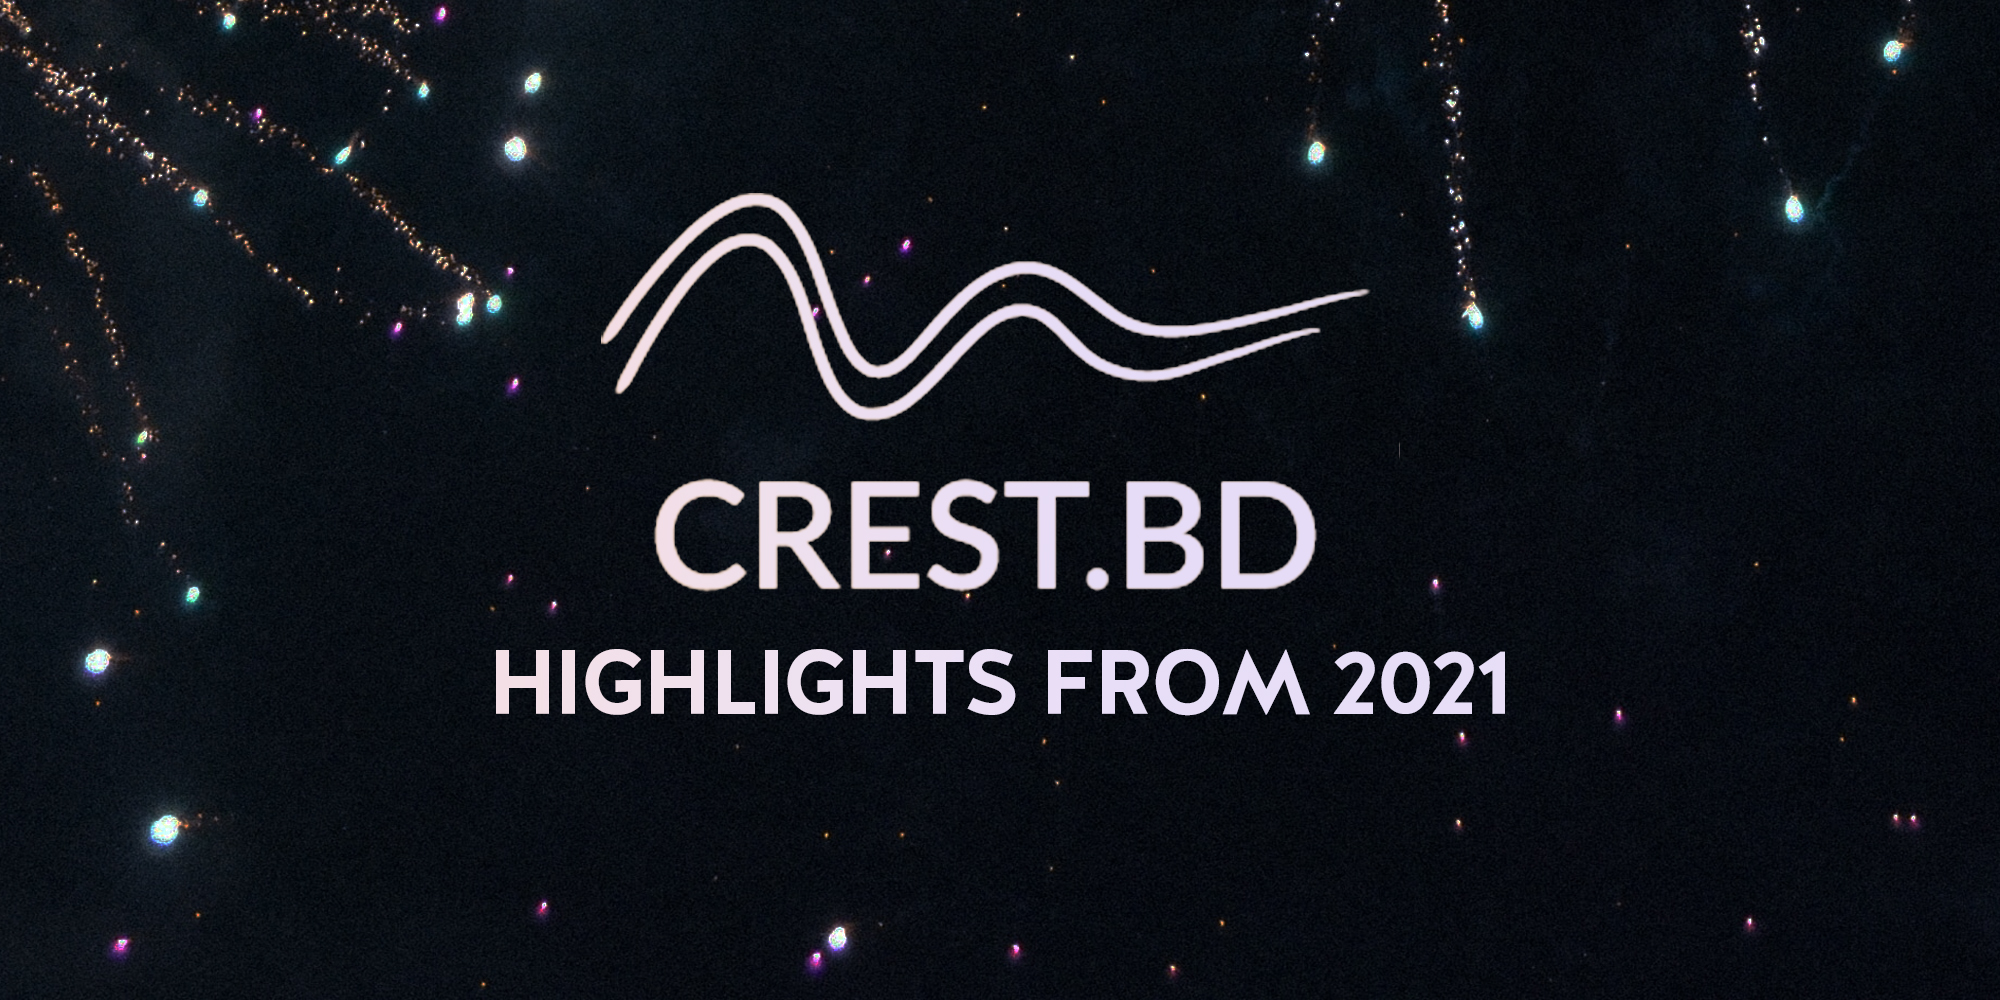 Happy New Year from CREST.BD! Our bipolar disorder highlights from 2021.